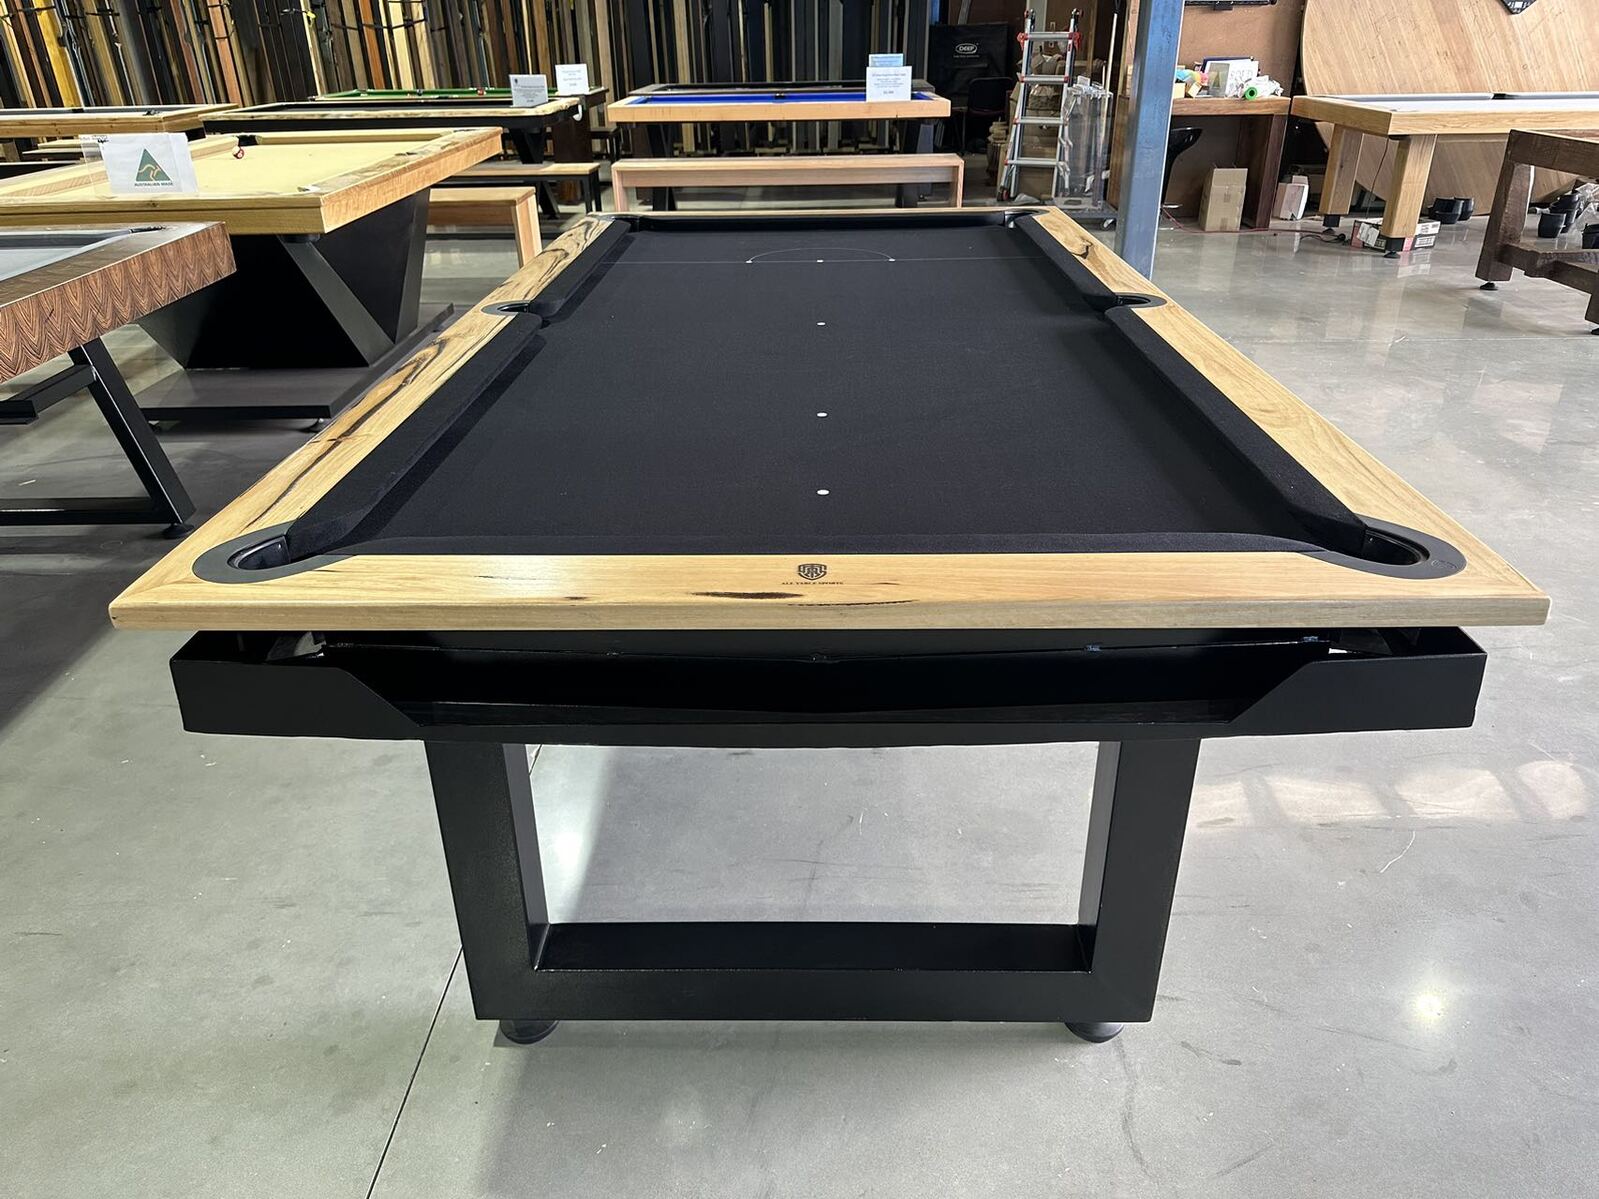 PRE-MADE 8 Foot Slate ODYSSEY Pool Table with Messmate Timber